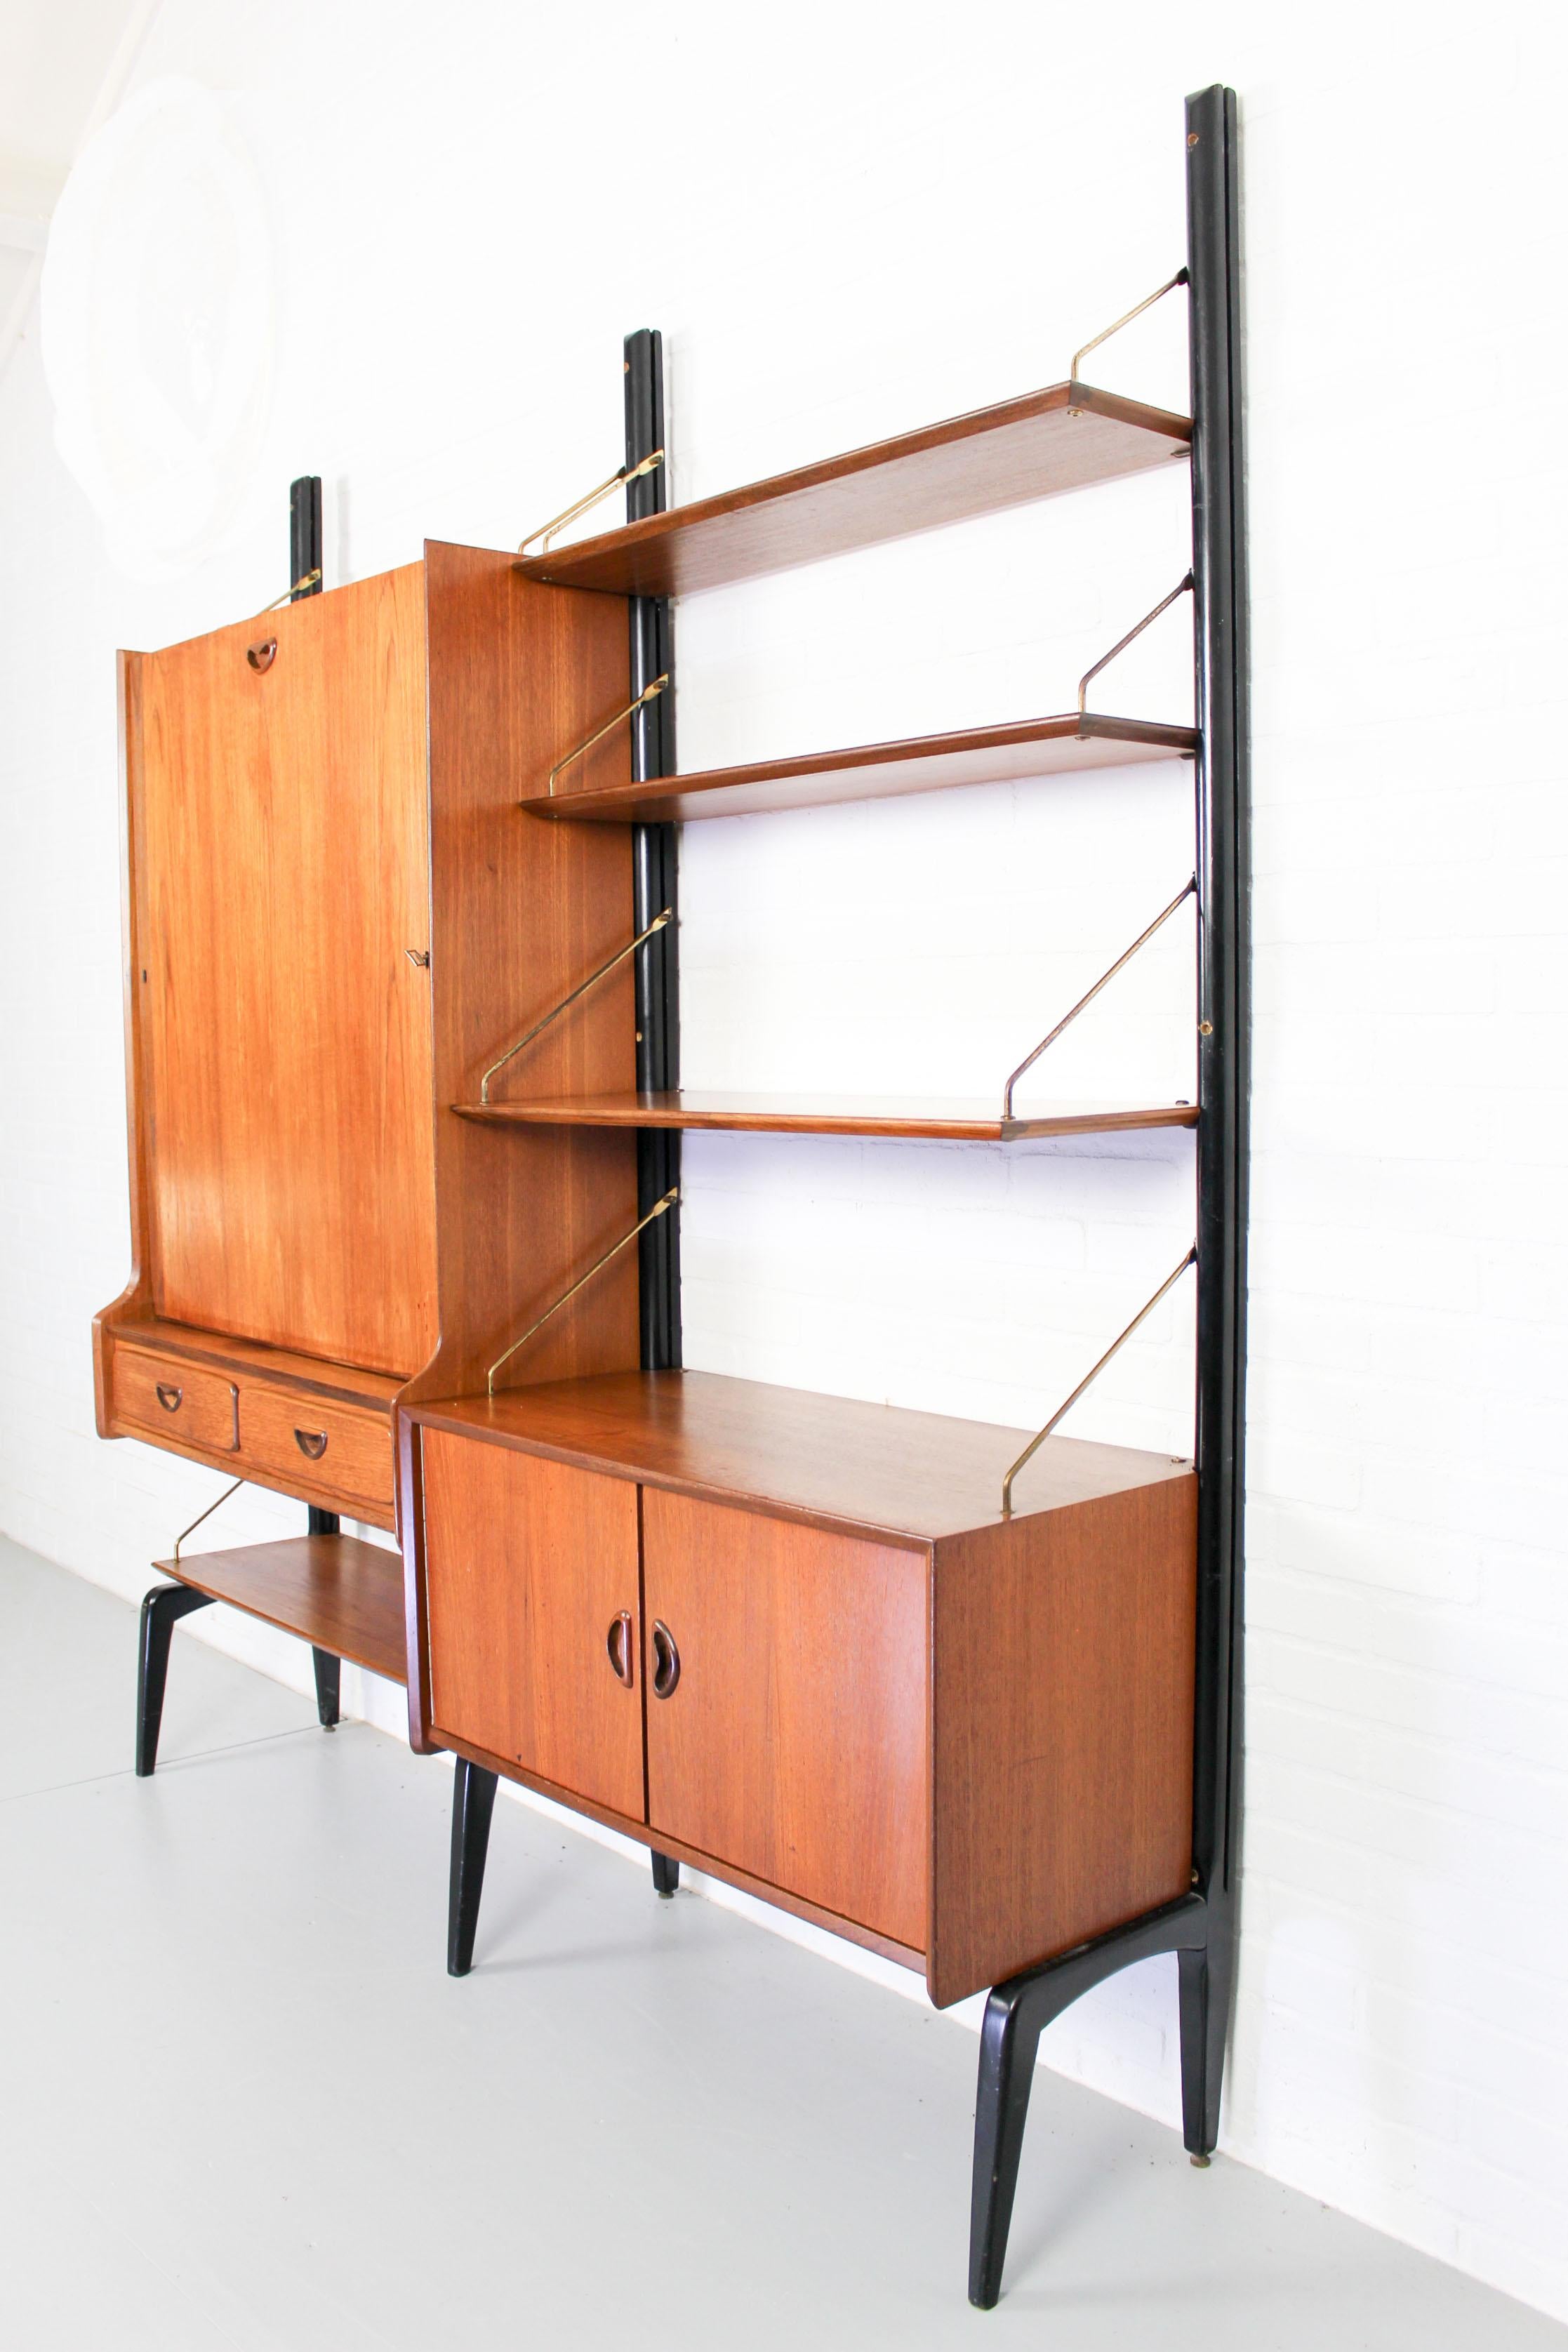 Modular wall unit by Van Teeffelen for WeBe, 1950s. This well detailed wall system was designed by Dutch designer Louis Van Teeffelen and produced by WéBé Holland. This super shaped, Danish organic inspired wall unit has black ant shaped feet, teak